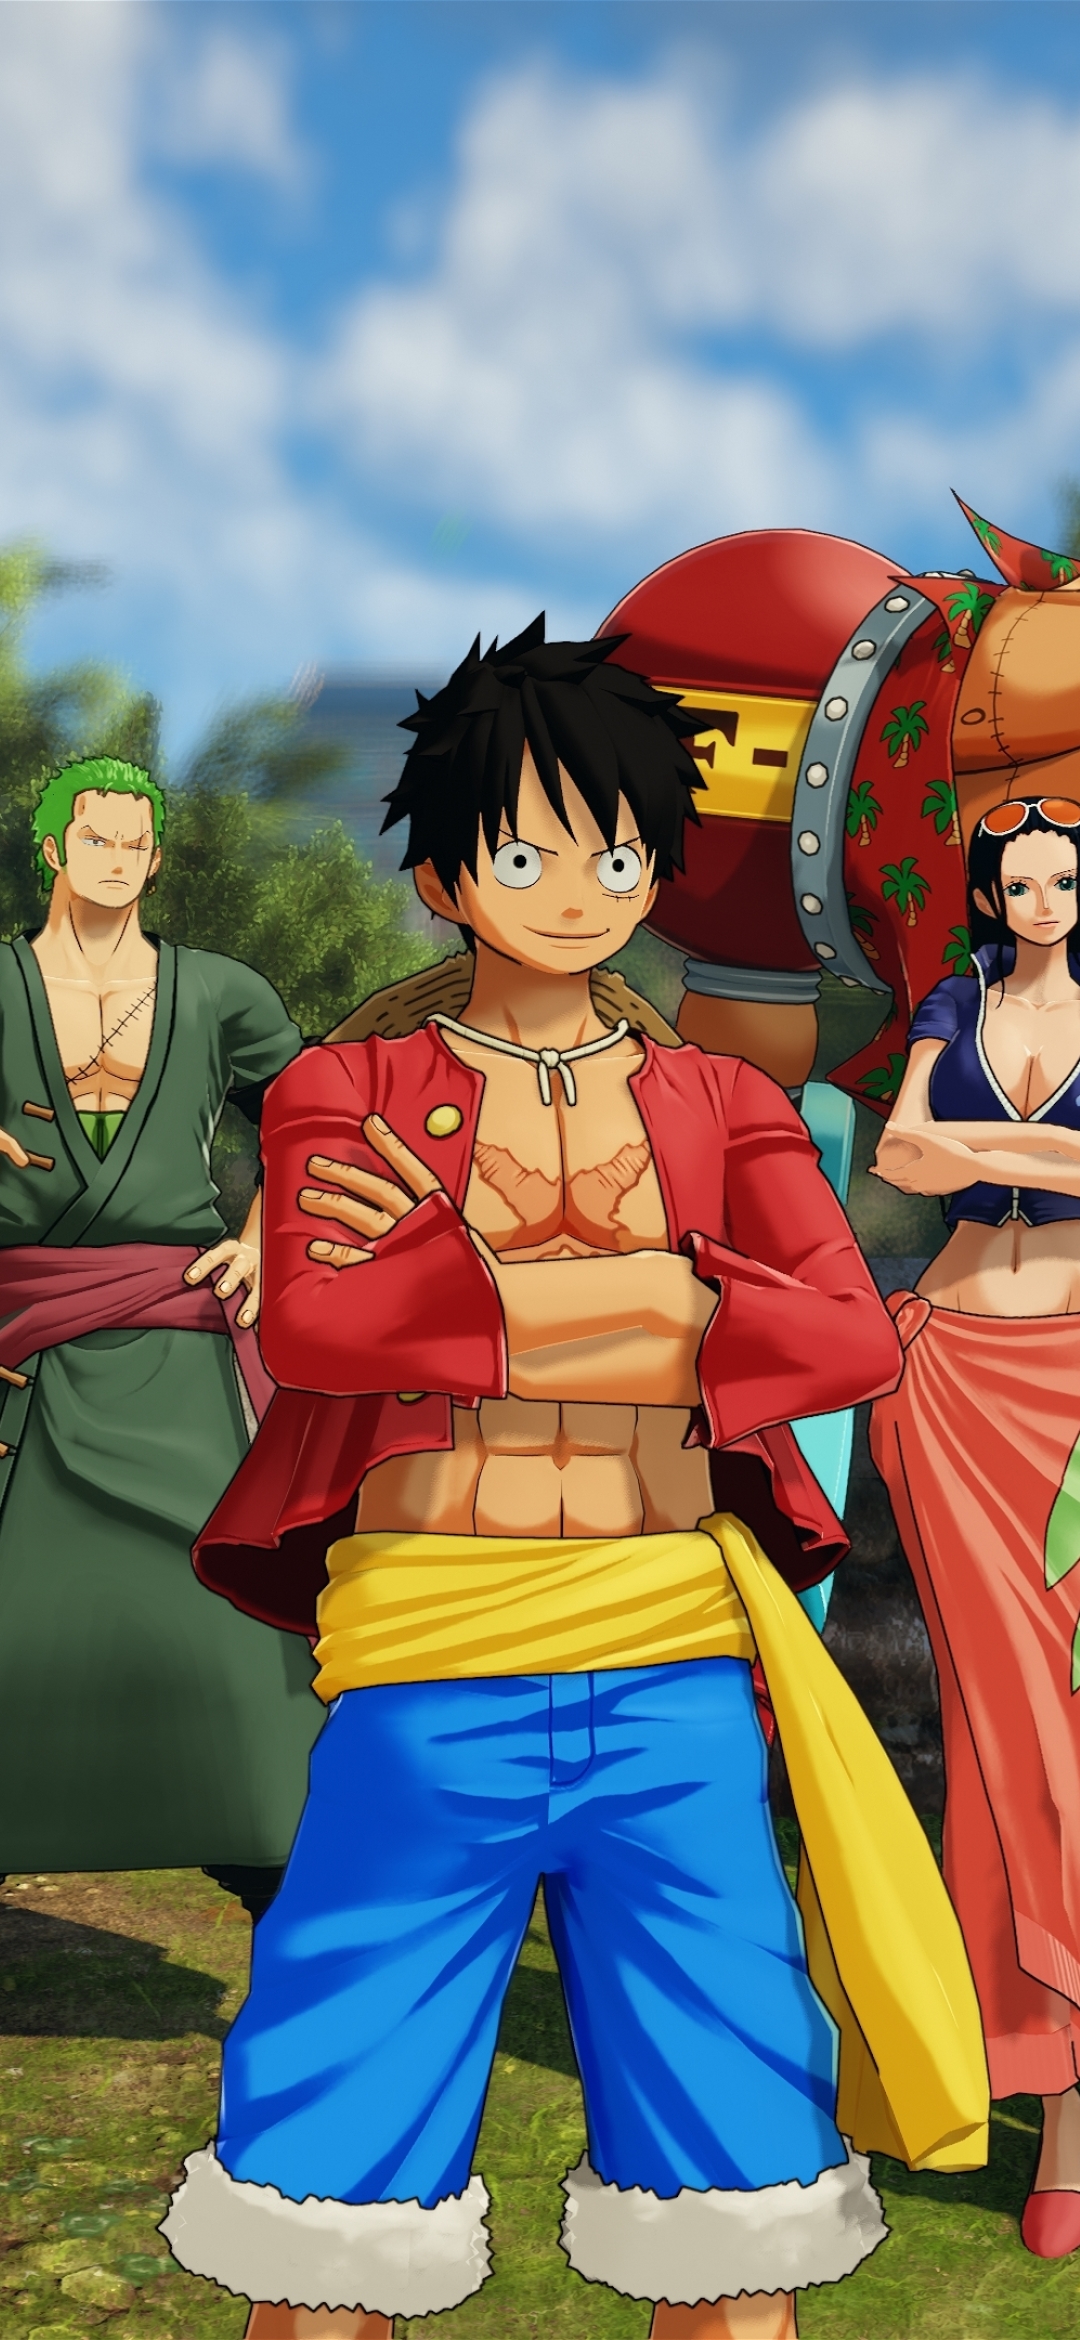 Wallpaper 4k Phone Anime One Piece - One Piece Mobile 4k Wallpapers ...